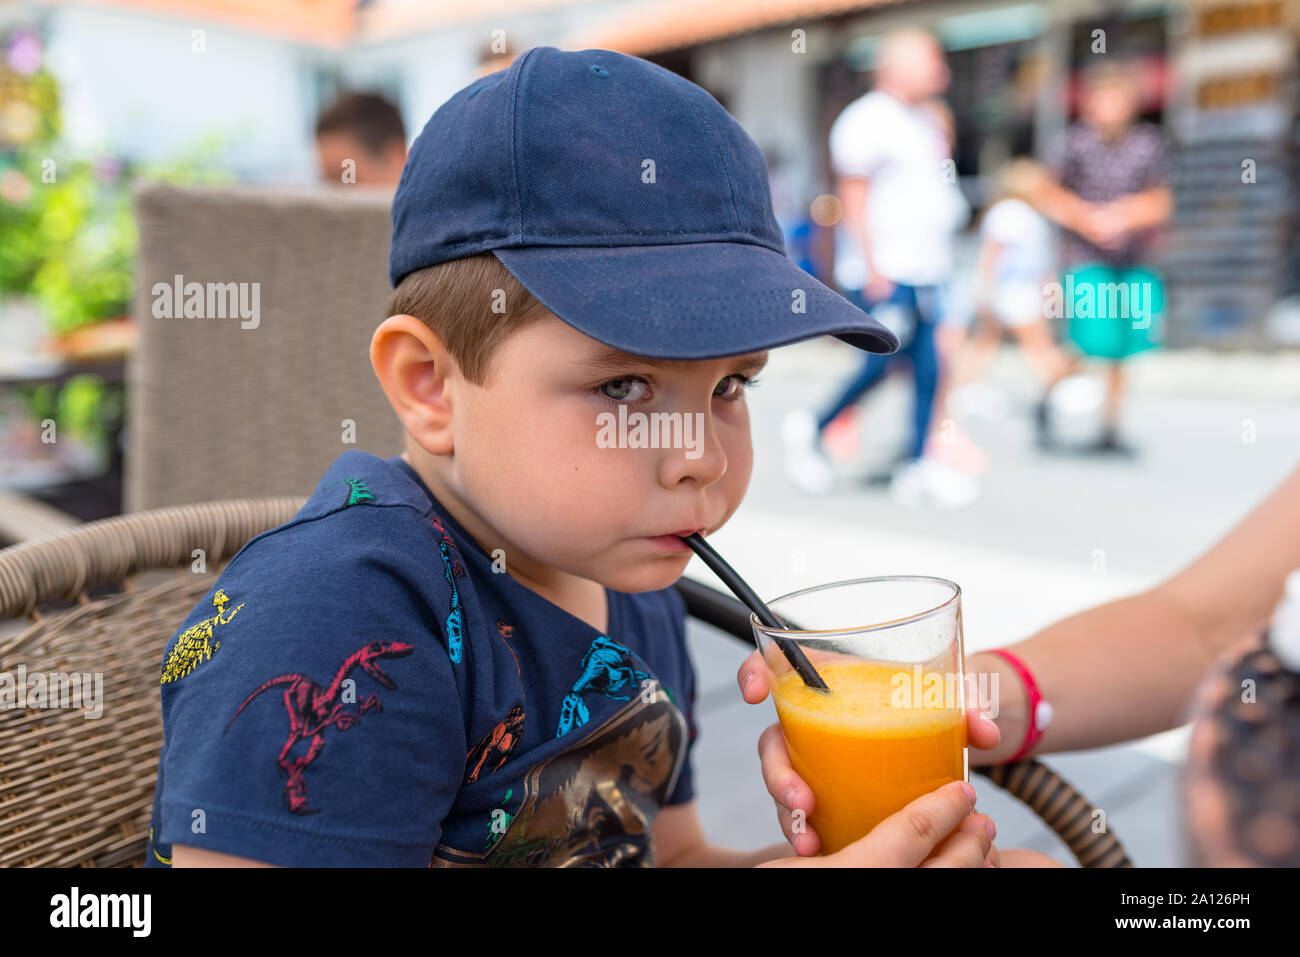 Five-year cute boy in a navy blue baseball cap sitting on a wicker chair outside in a restaurant and drinks orange juice from a drinking straw. Stock Photo